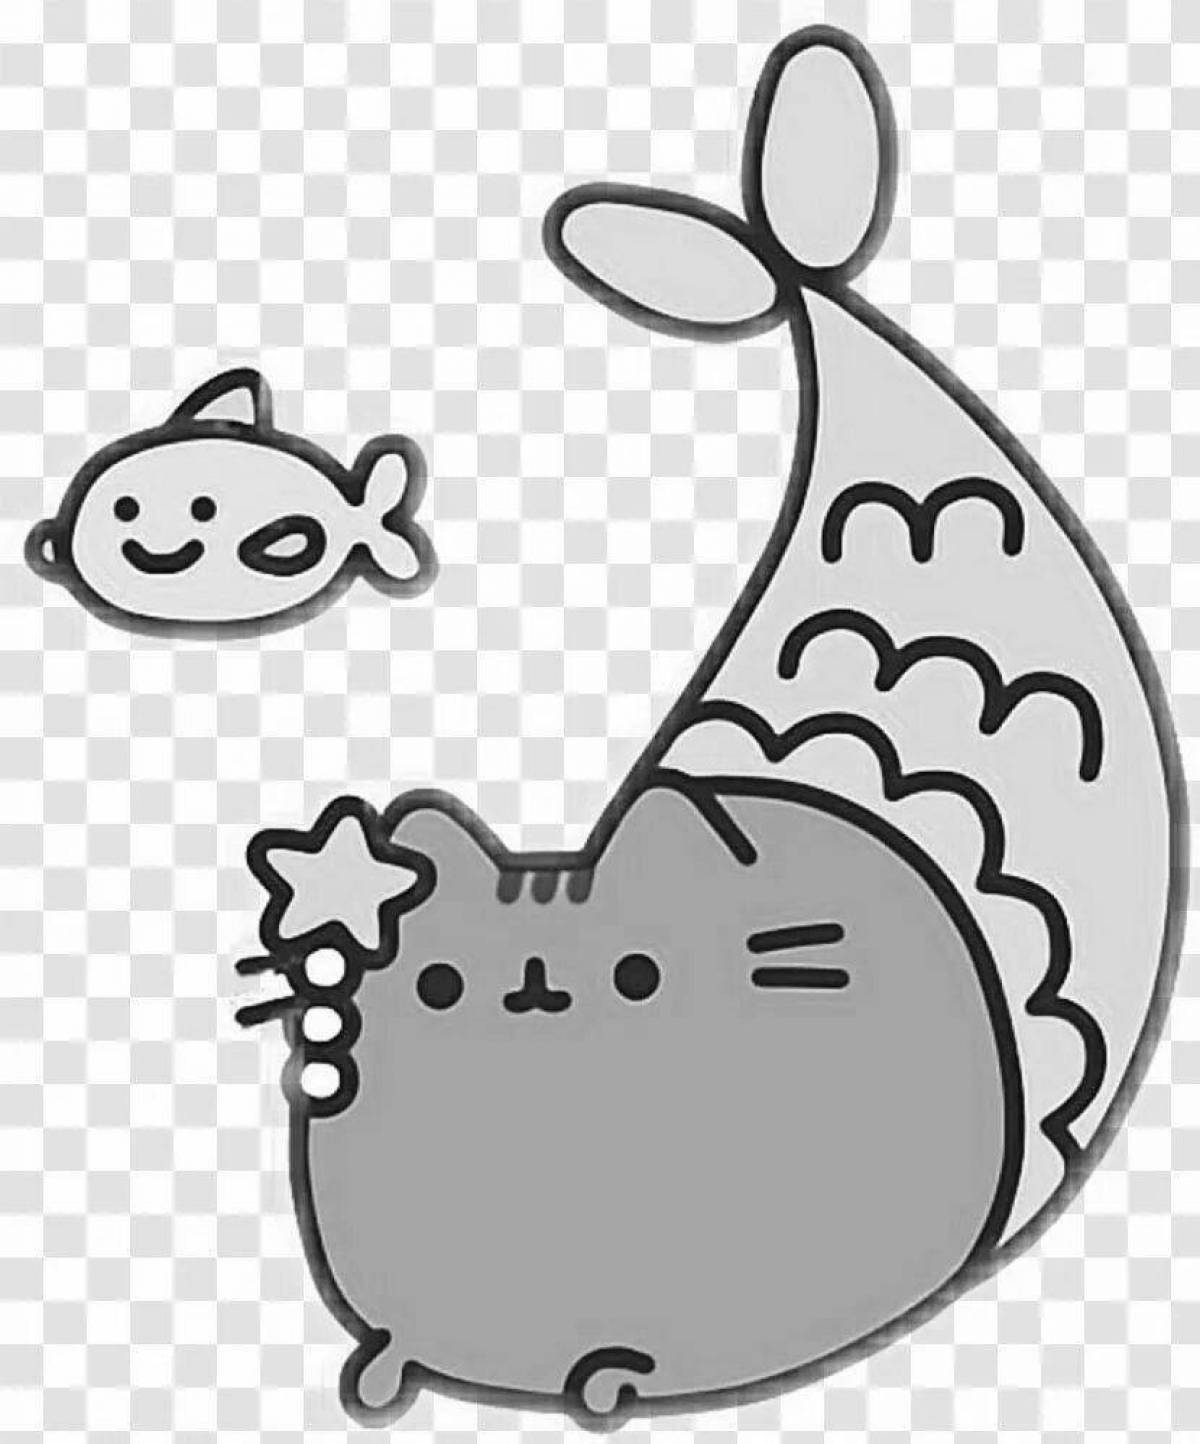 Pusheen Mermaid Live Coloring Page